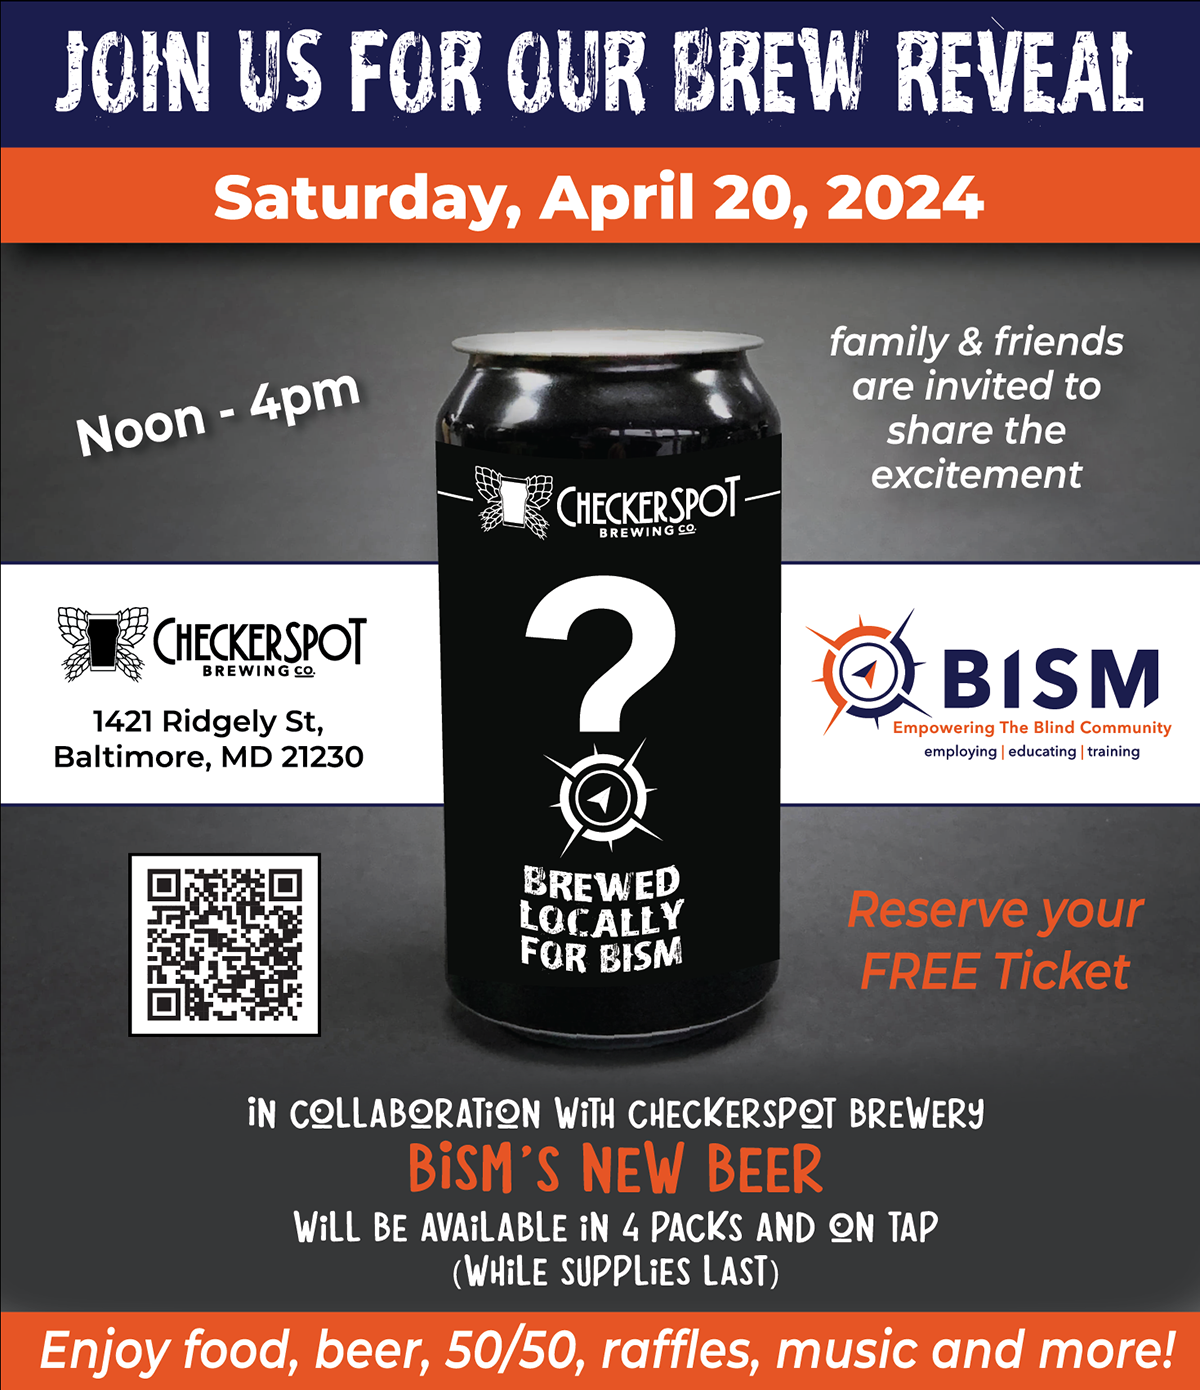 Poster promoting the BISM Brew Reveal with CheckerSpot Brewing Co. on Saturday, April 20, 2024 from noon until 4pm.